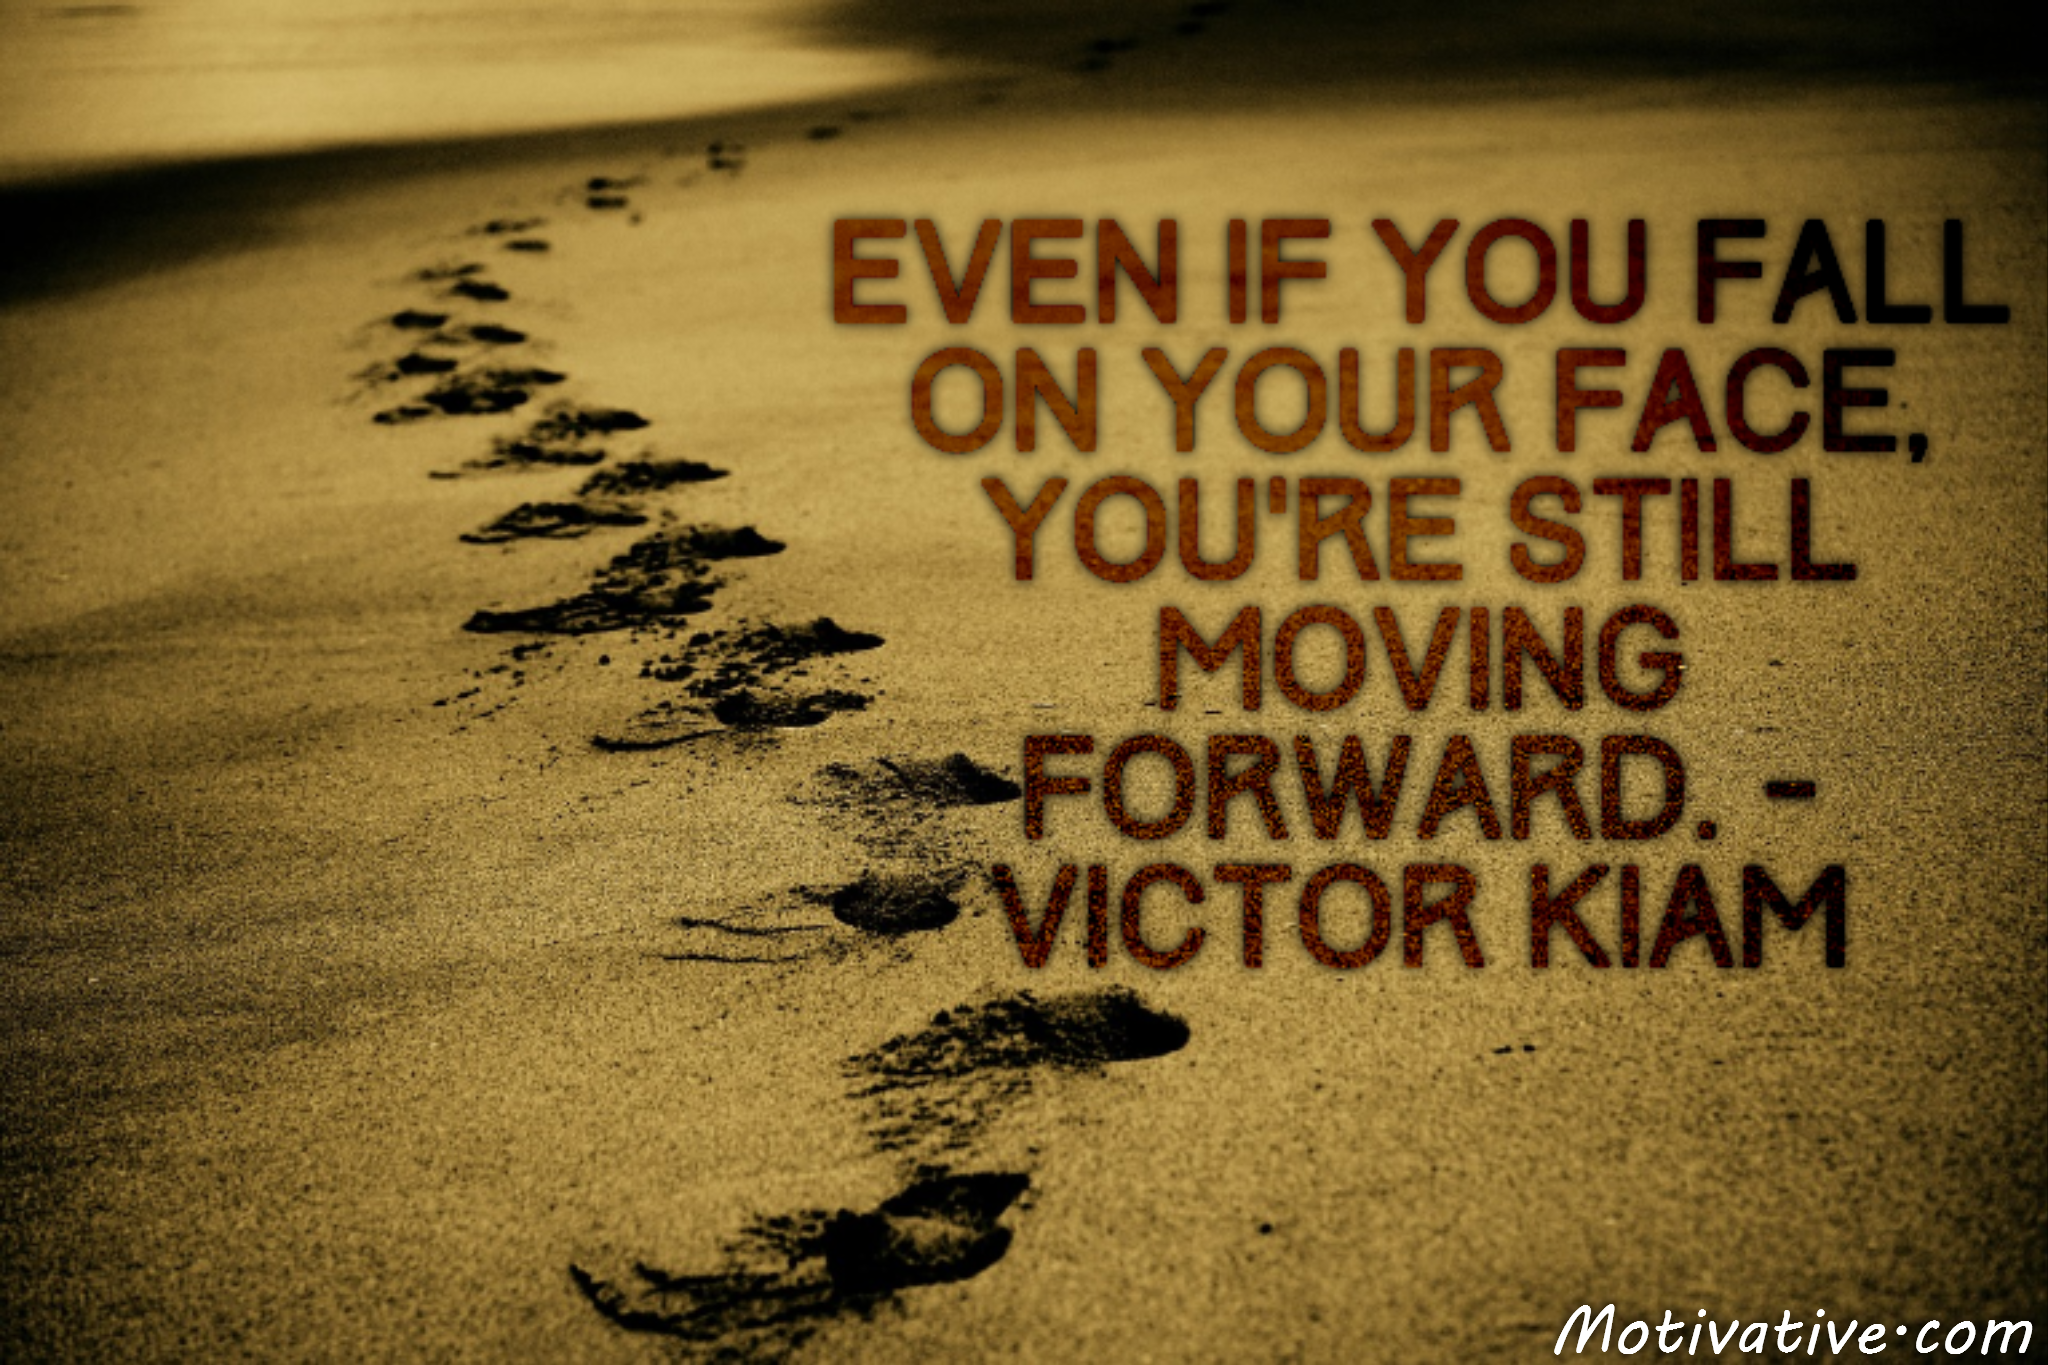 Even if you fall on your face, you’re still moving forward. – Victor Kiam